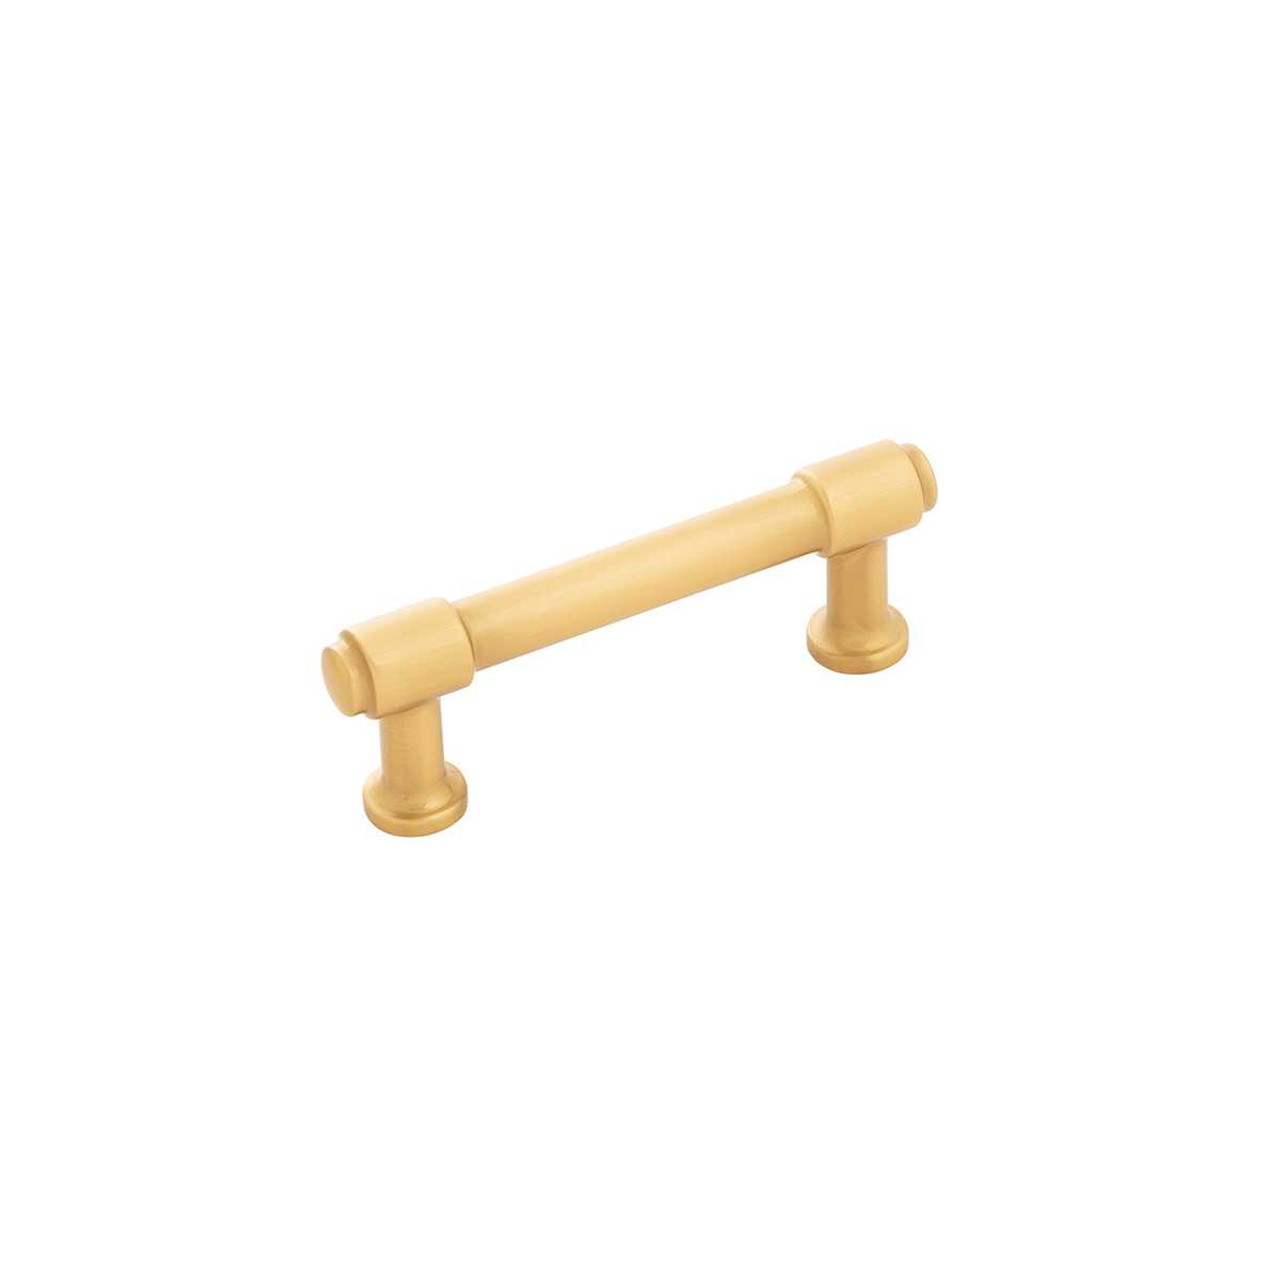 https://cdn11.bigcommerce.com/s-1xpphv/images/stencil/1280x1280/products/1487/15400/HICKORY-Piper-Handle-Cabinet-Pulls-Brushed-Golden-Brass-4-Sizes-Available_11968__94923.1674497514.jpg?c=2